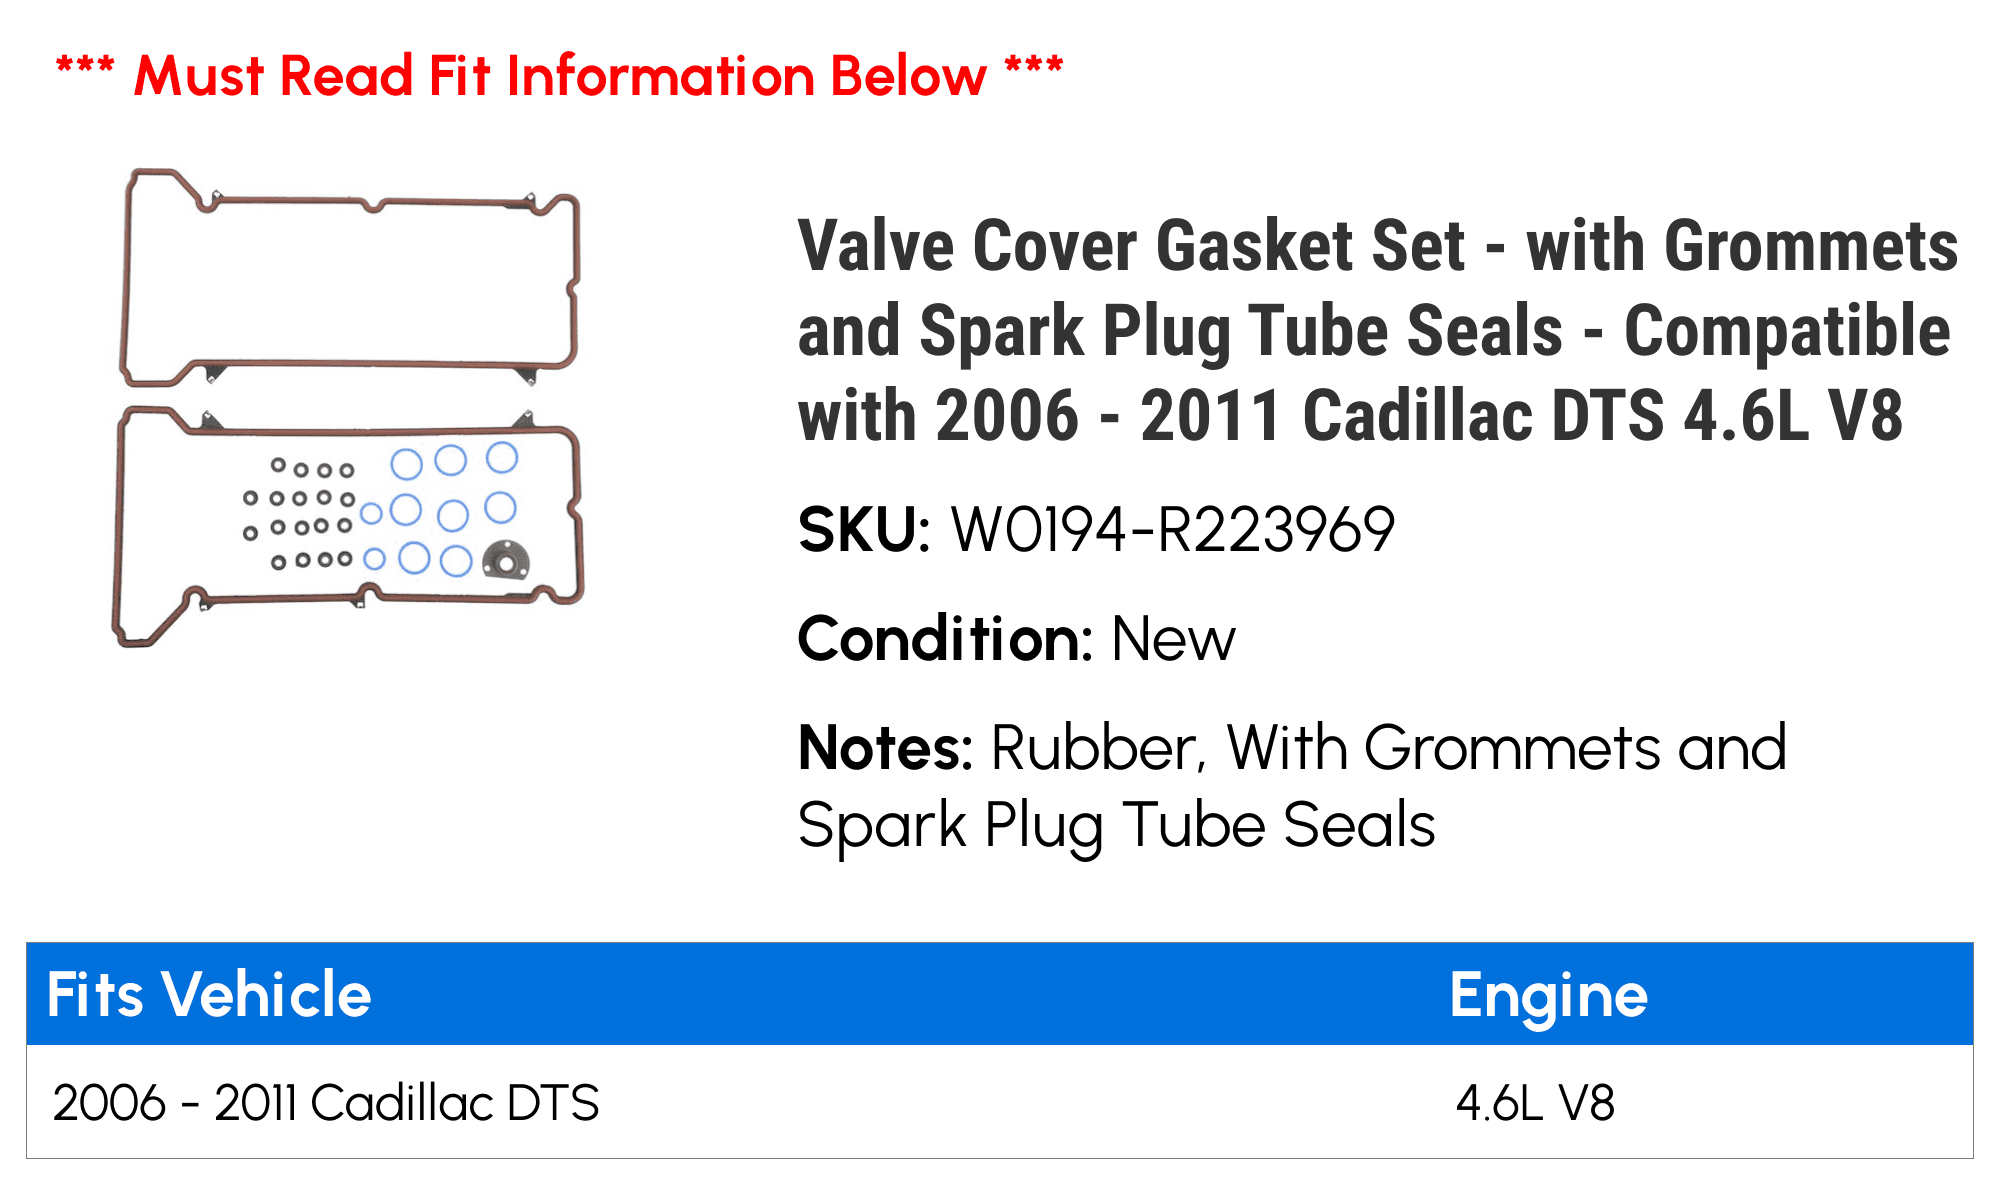 Valve Cover Gasket Set with Grommets and Spark Plug Tube Seals  Compatible with 2006 2011 Cadillac DTS 4.6L V8 2007 2008 2009 2010 